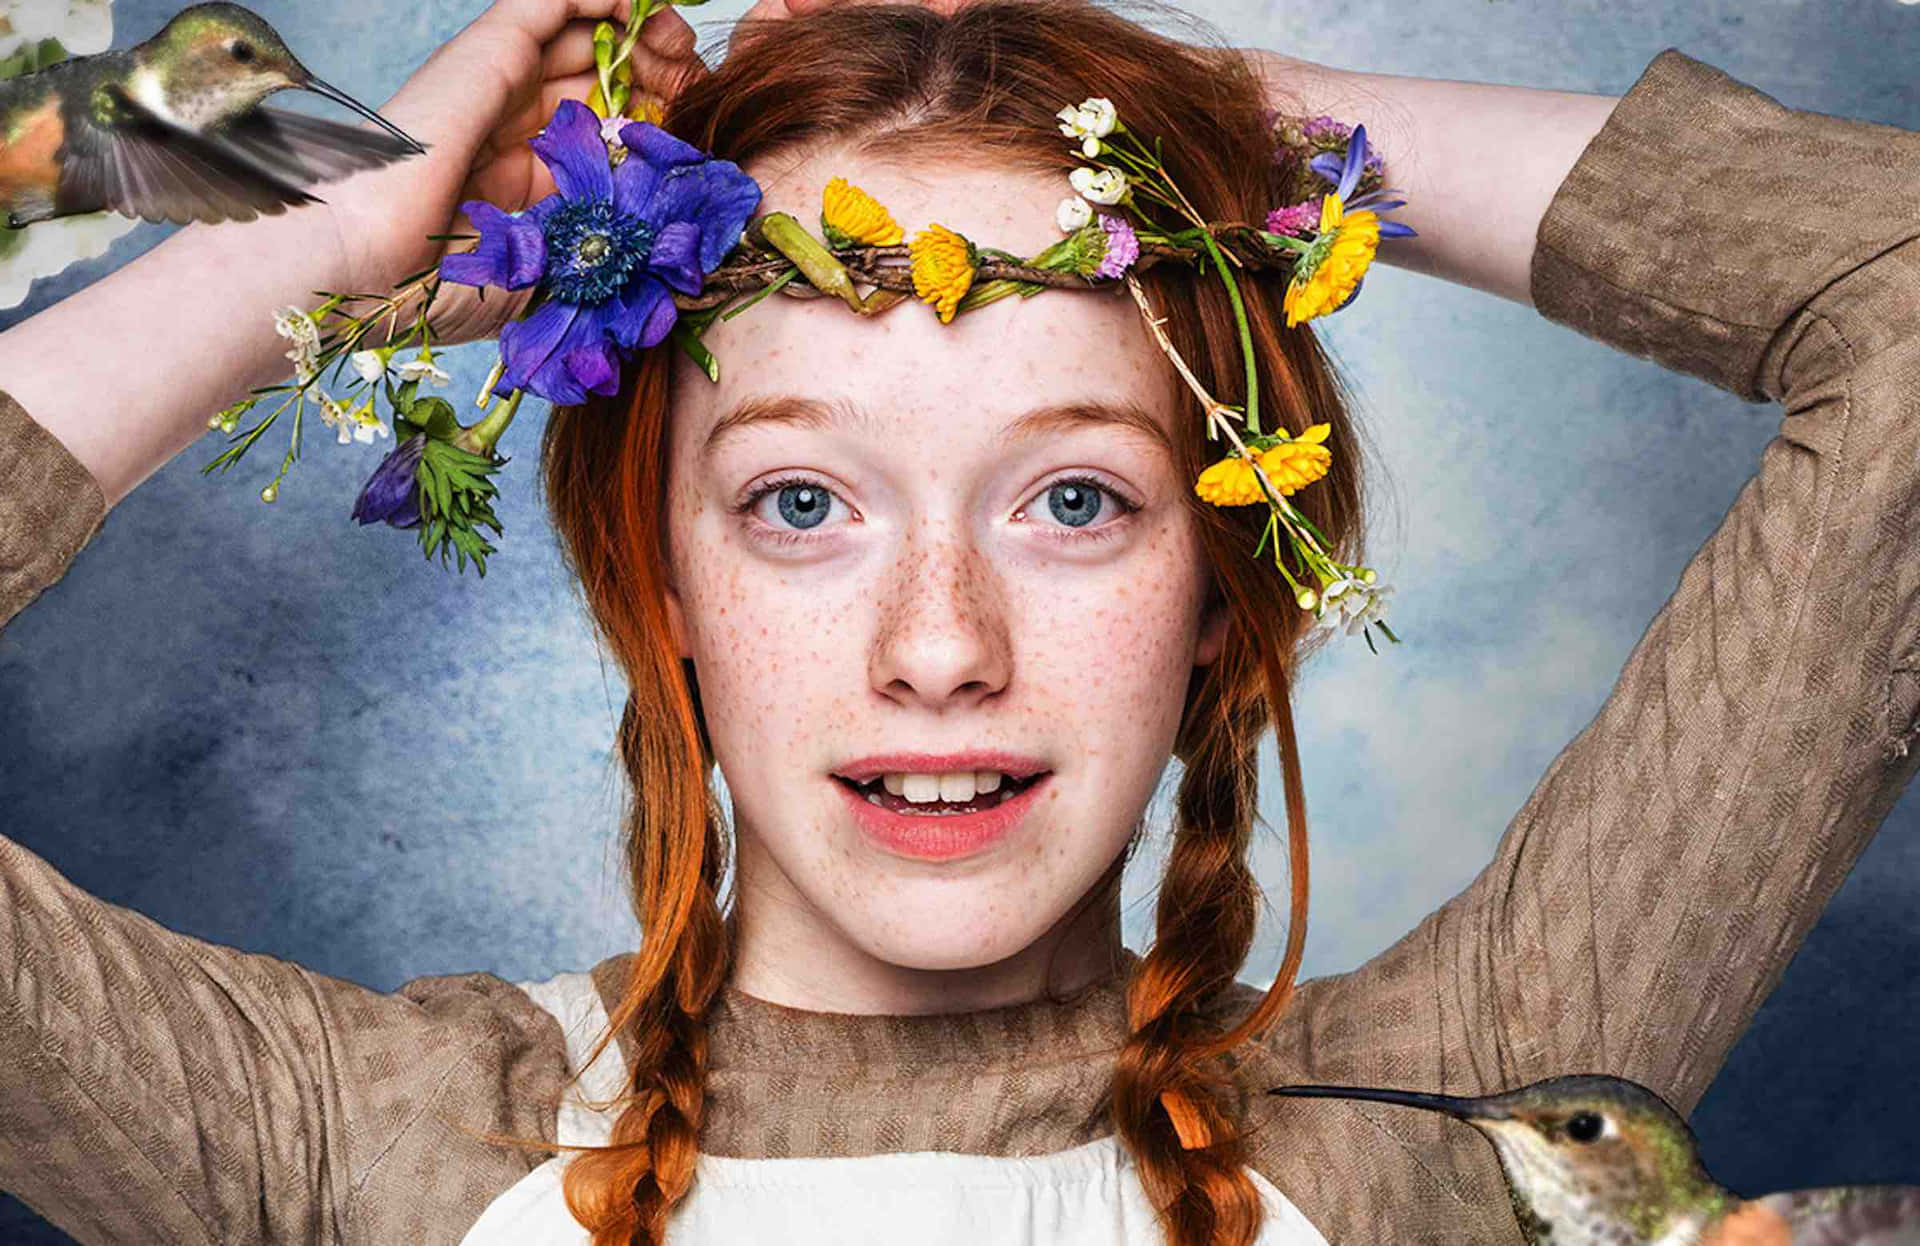 A Girl With Red Hair Is Holding A Flower Crown